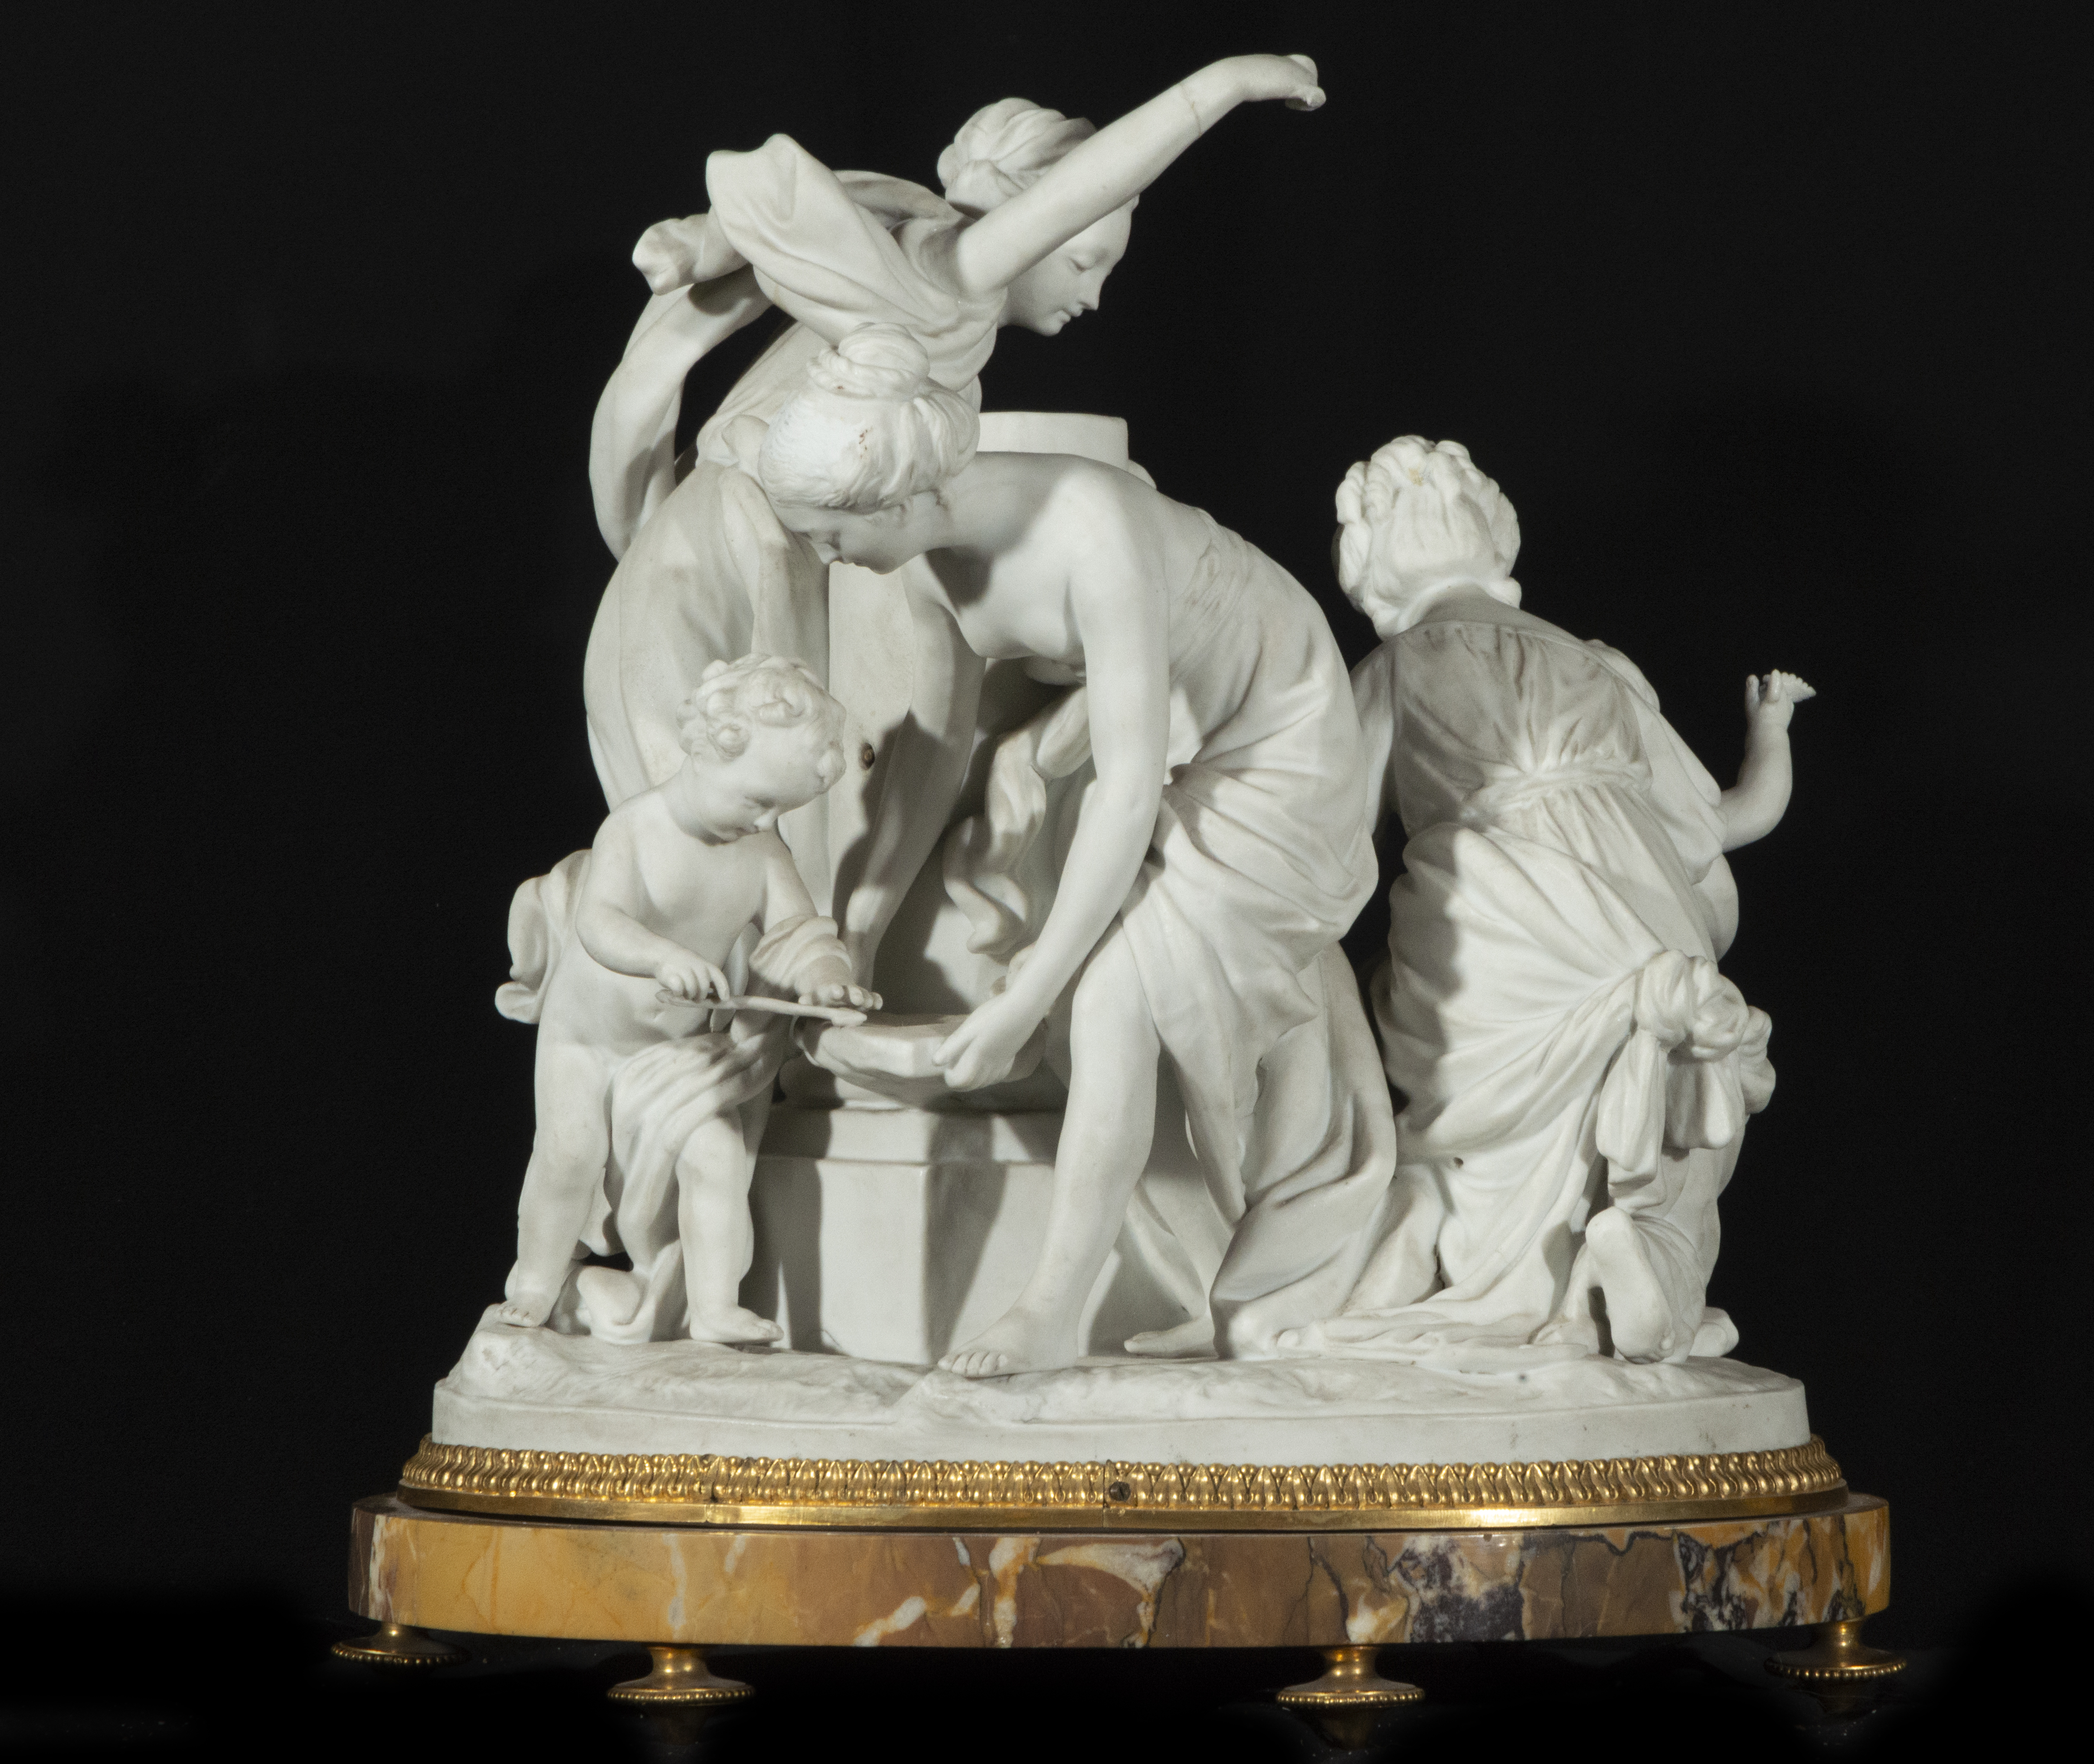 Elegant Louis XVI table clock in Siena marble, gilt bronze, and biscuit porcelain from Sèvres, late  - Image 4 of 4